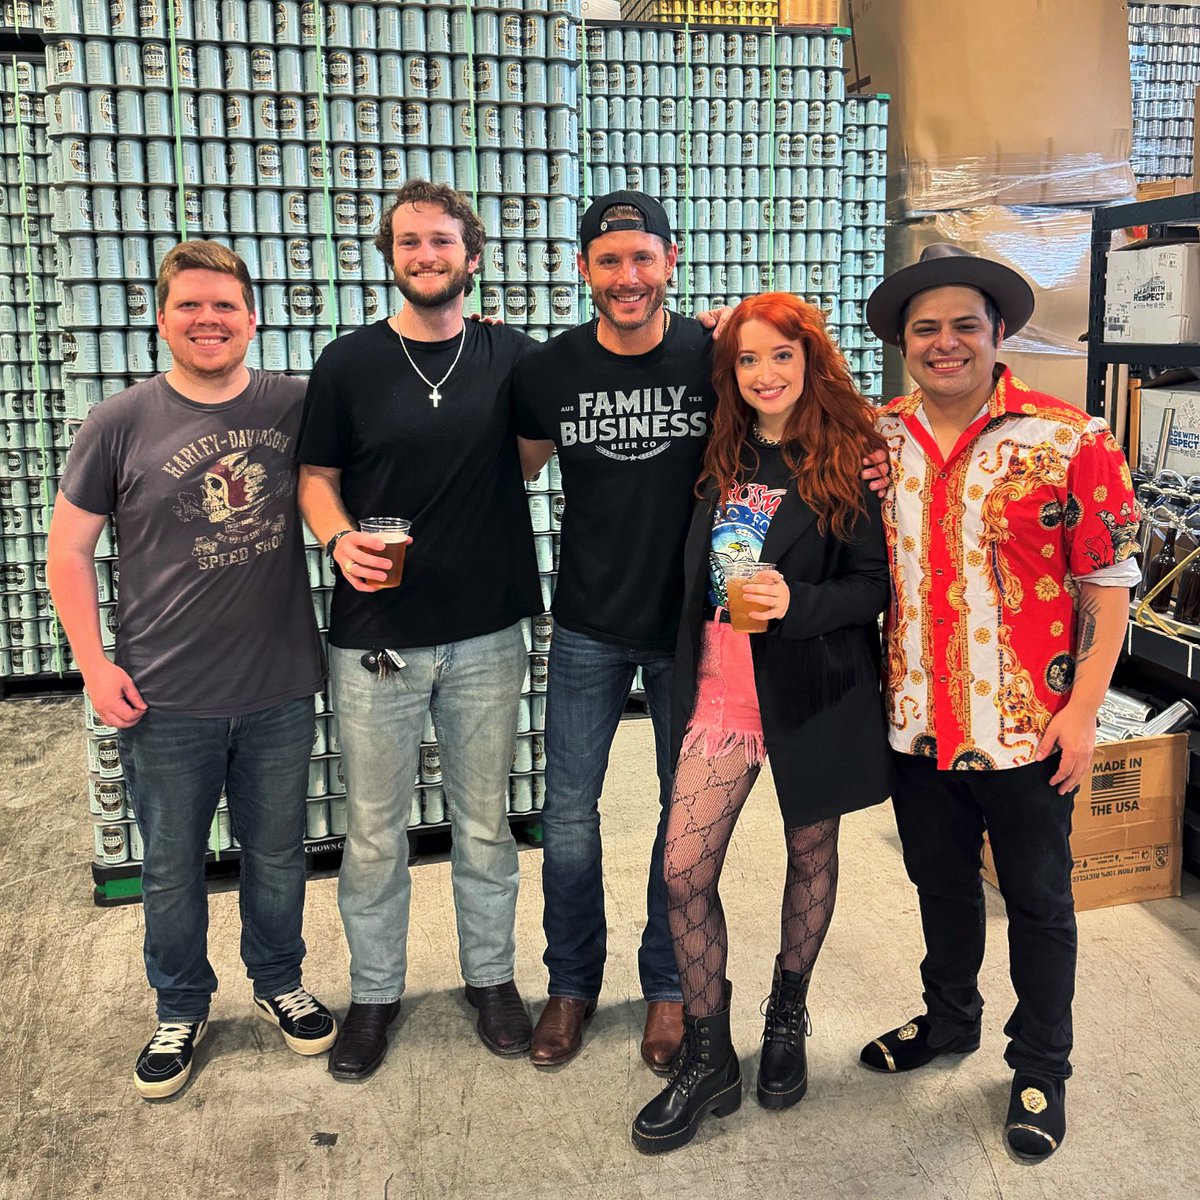 We love performing at @TheFamilyBeer, but getting to talk to @JensenAckles this go around was even better! The members-only party was a blast🤘🏼Thank you to the FBBC crew for having us! @nightparademusc

#atx #atxlivemusic #livemusic #coverband #FBBCmemberparty #JensenAckles